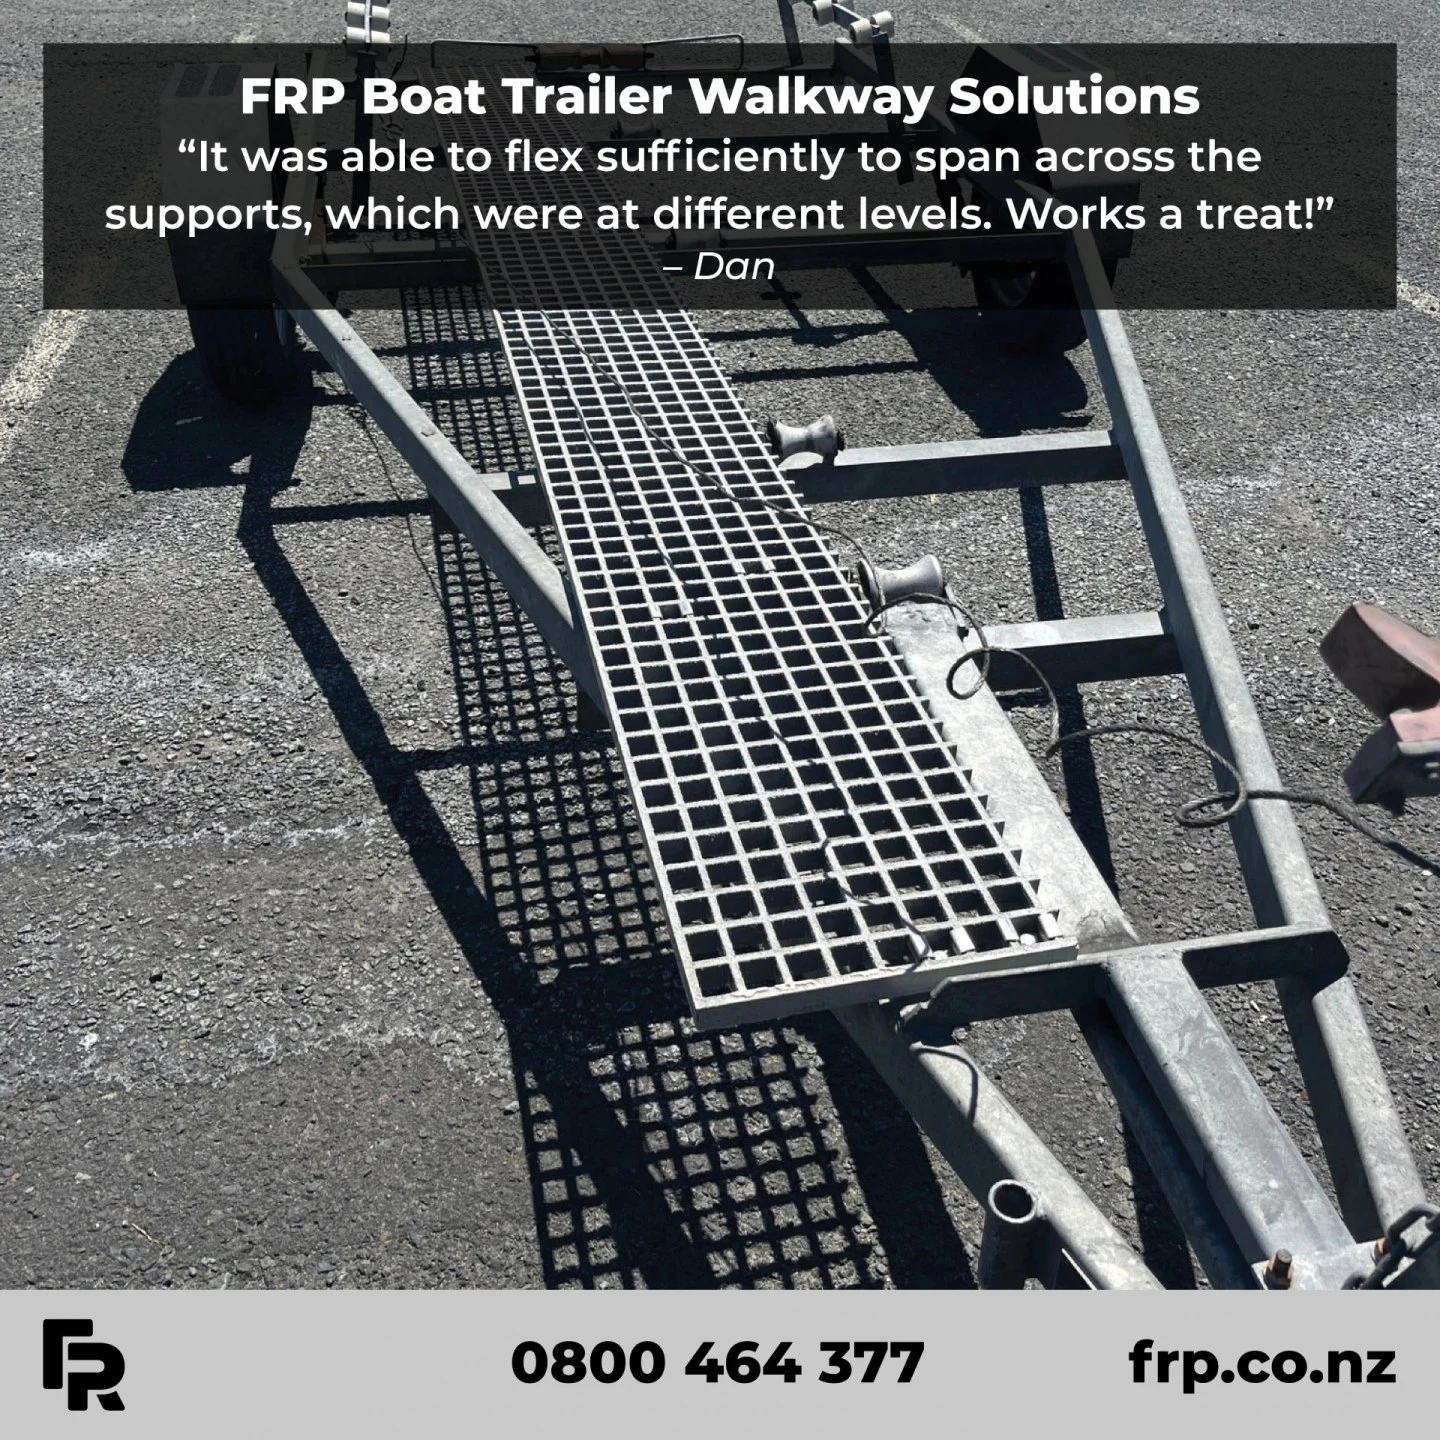 Speak to us about grating options today.

#frp #frpproducts #marine #marina #boat #trailer #nzmarine #jetty